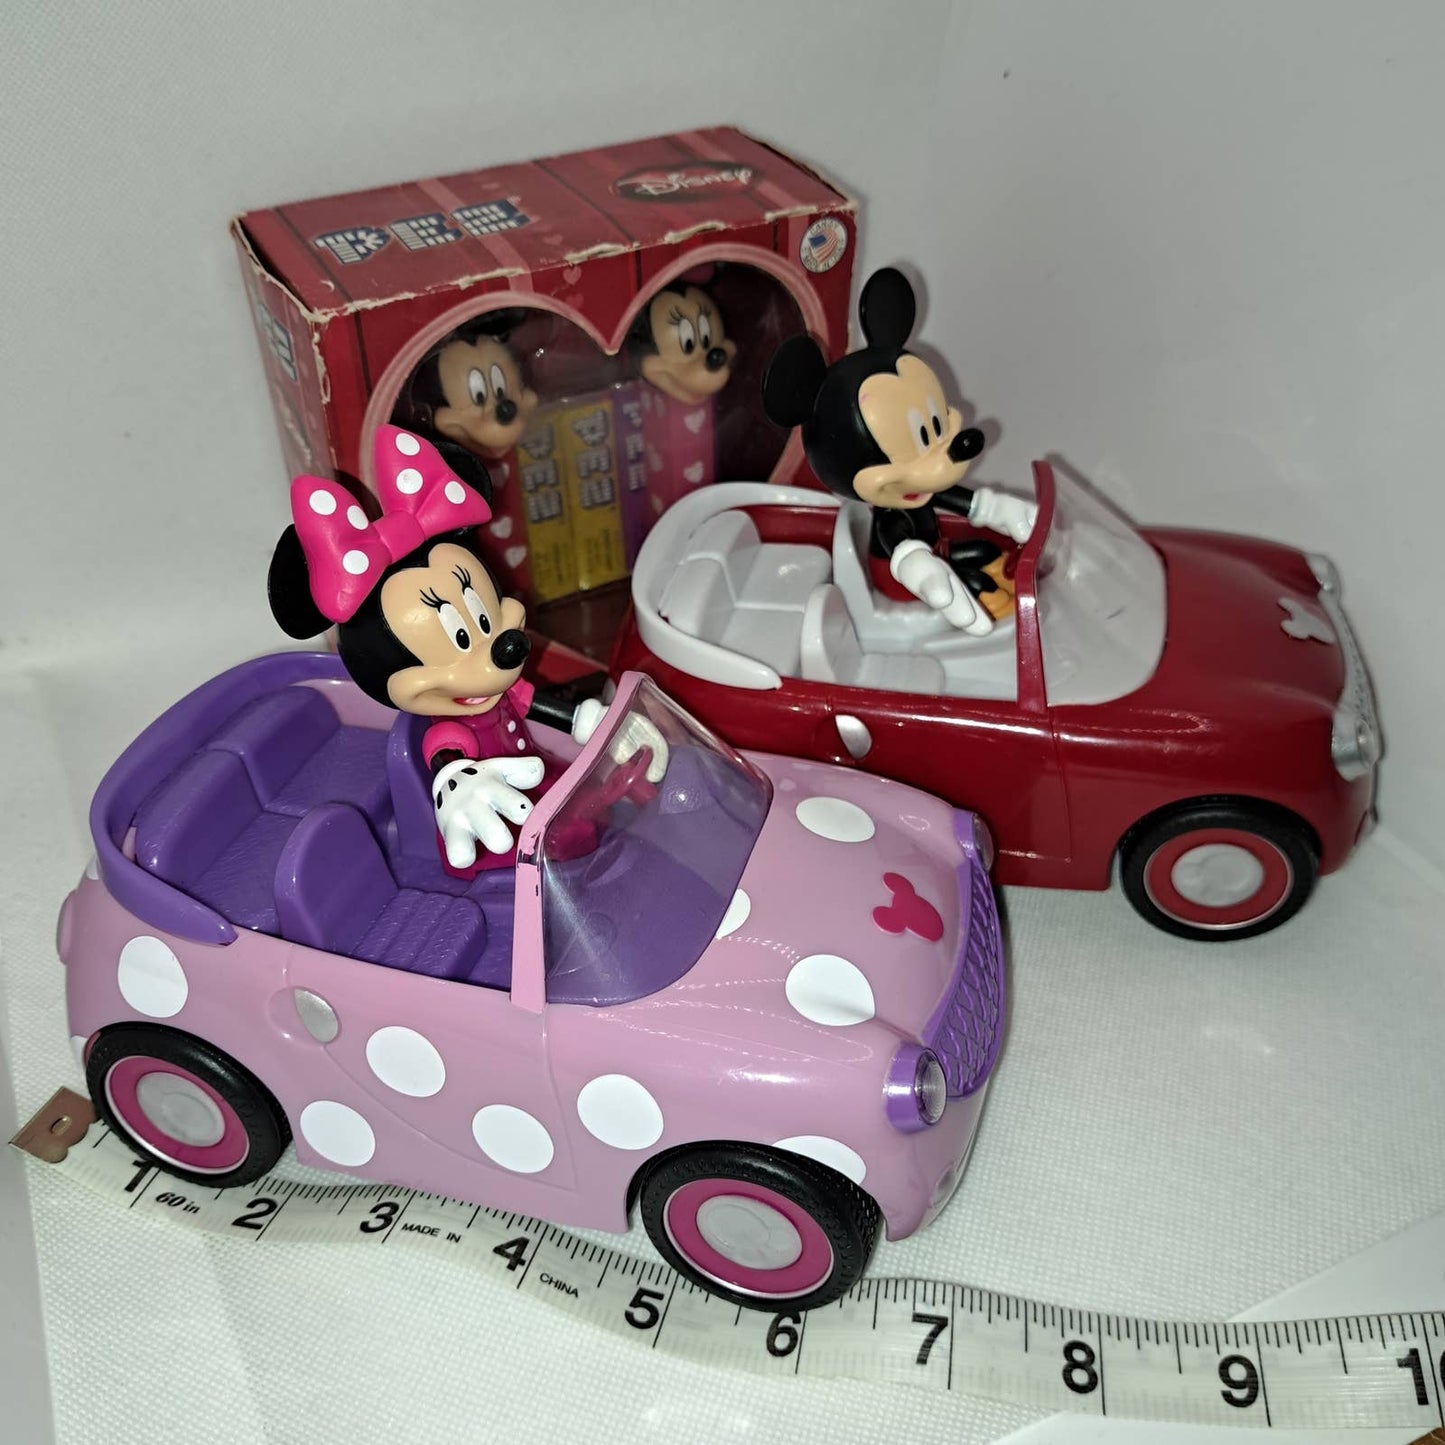 Vintage Minnie and Mickey - Battery Operated Cars and PEEZ